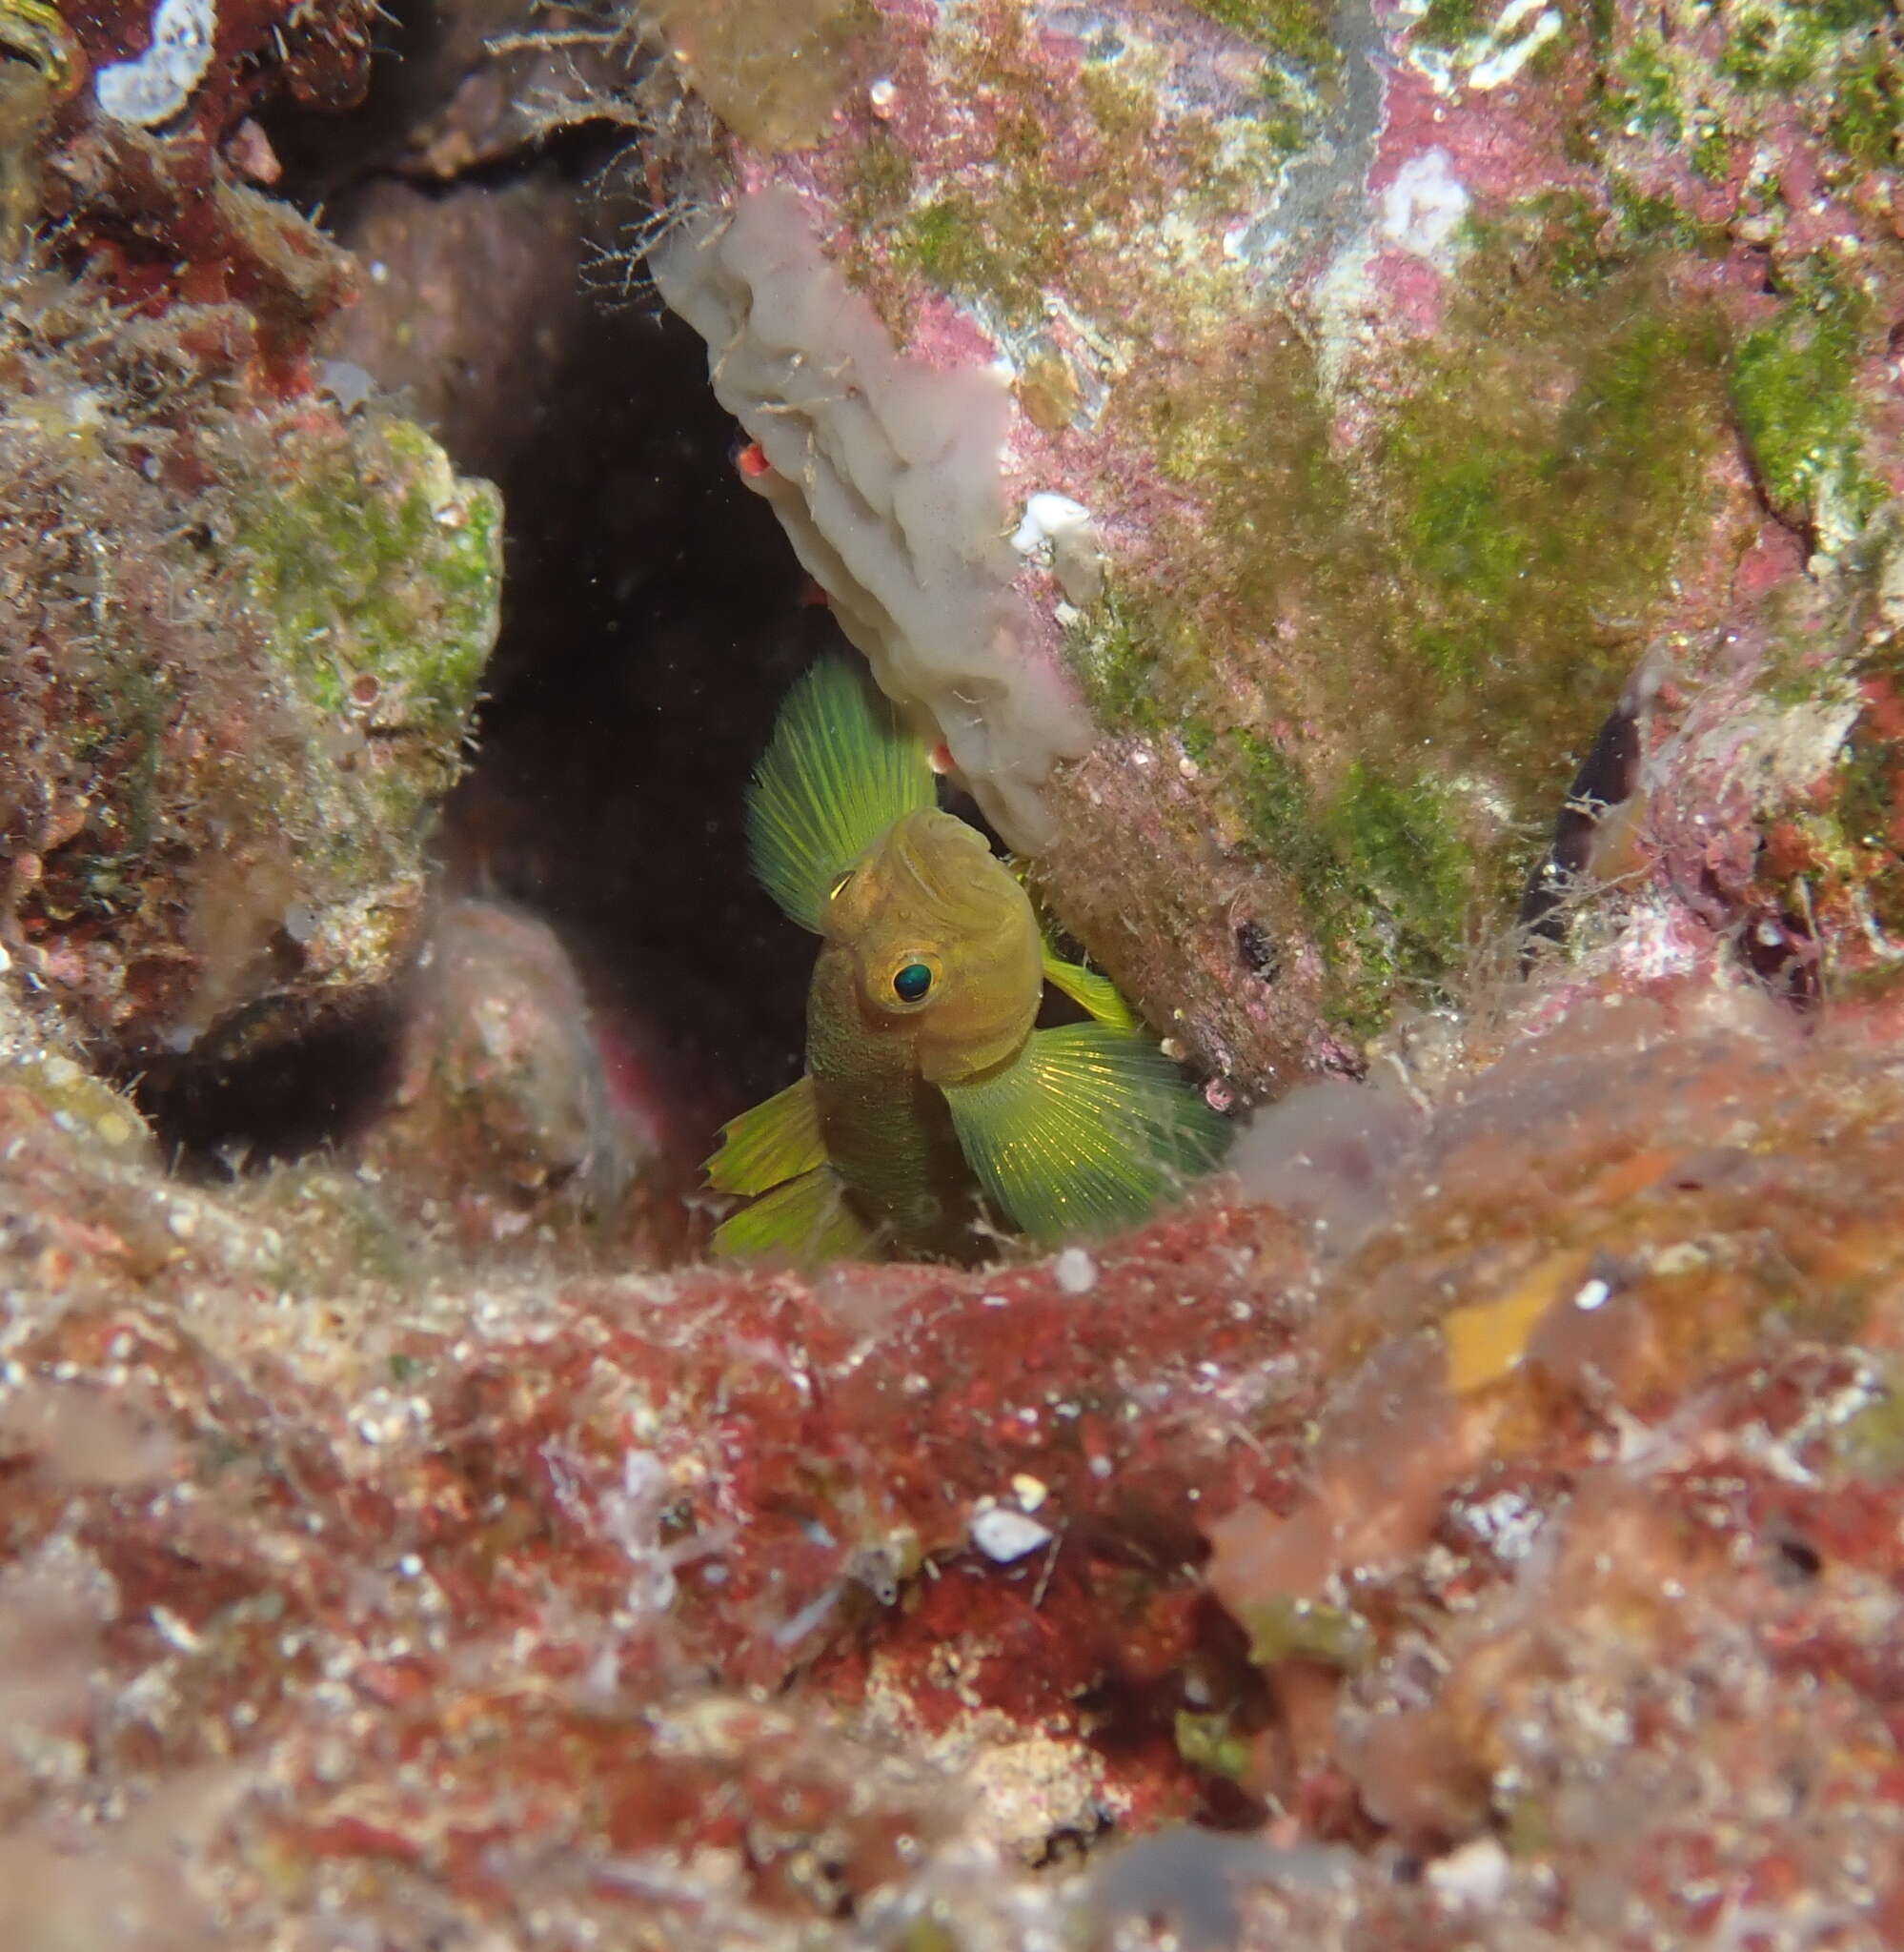 Image of Golden goby